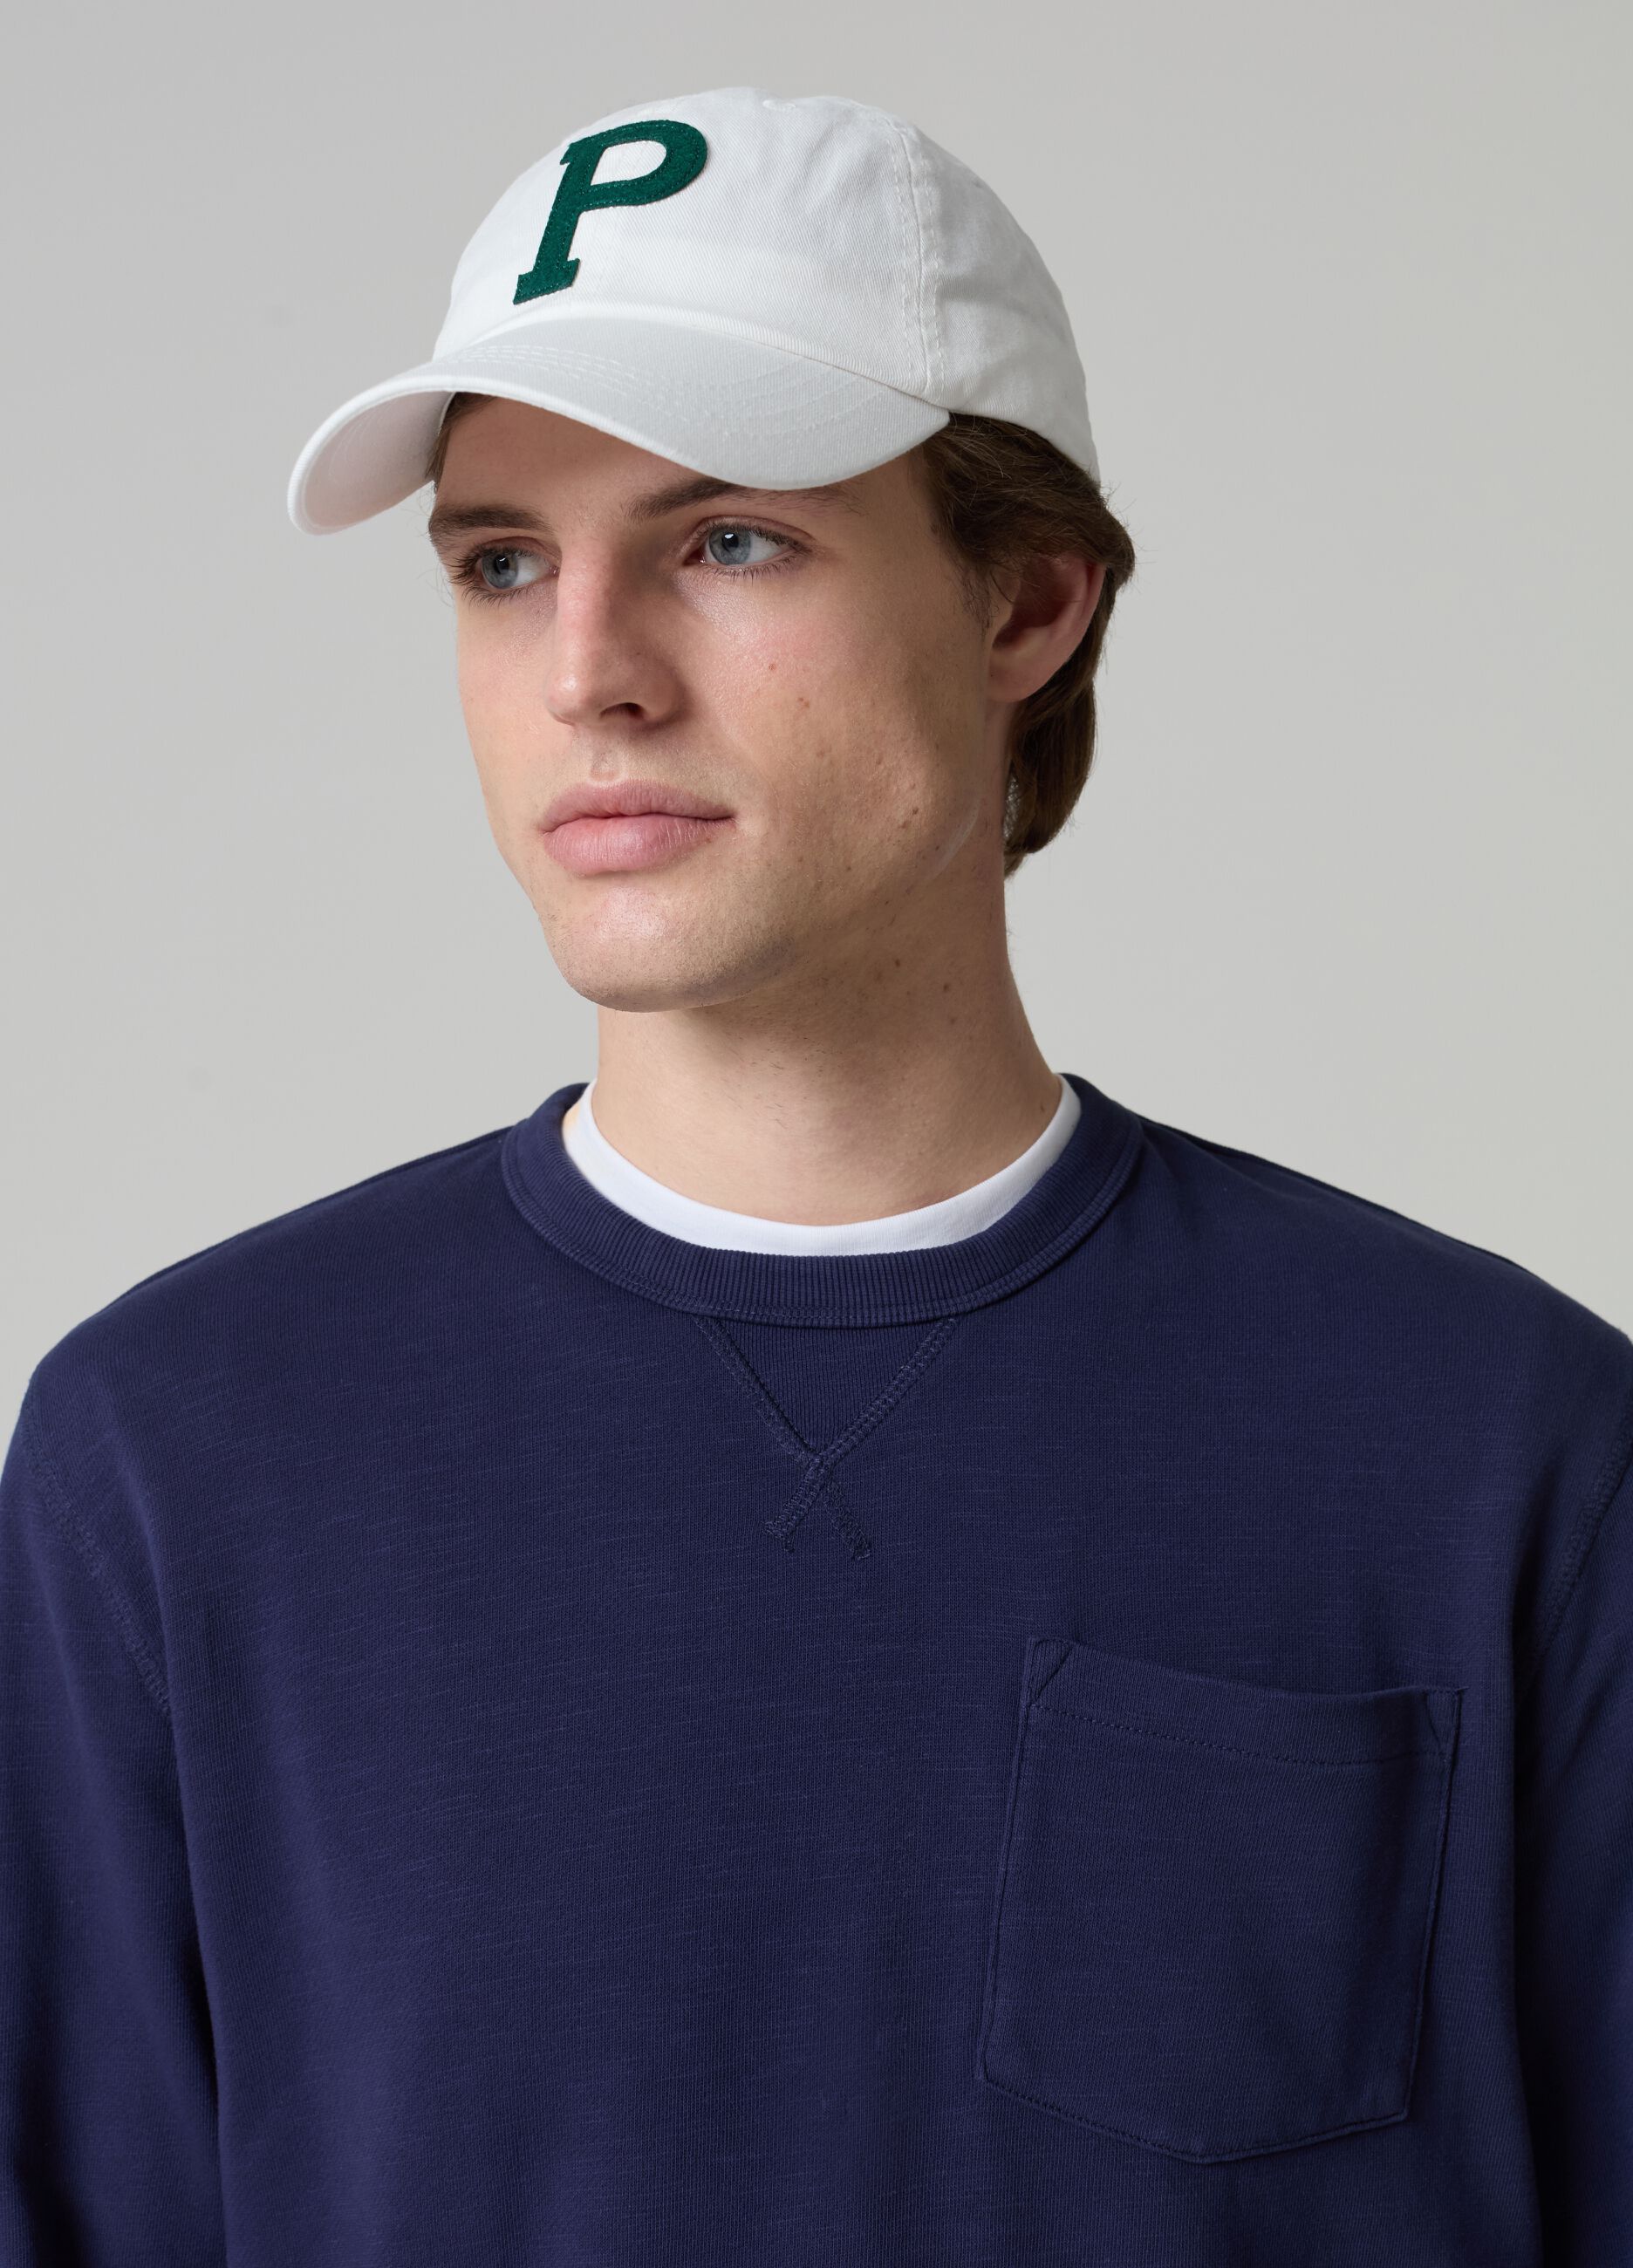 Sweatshirt with round neck and V detail